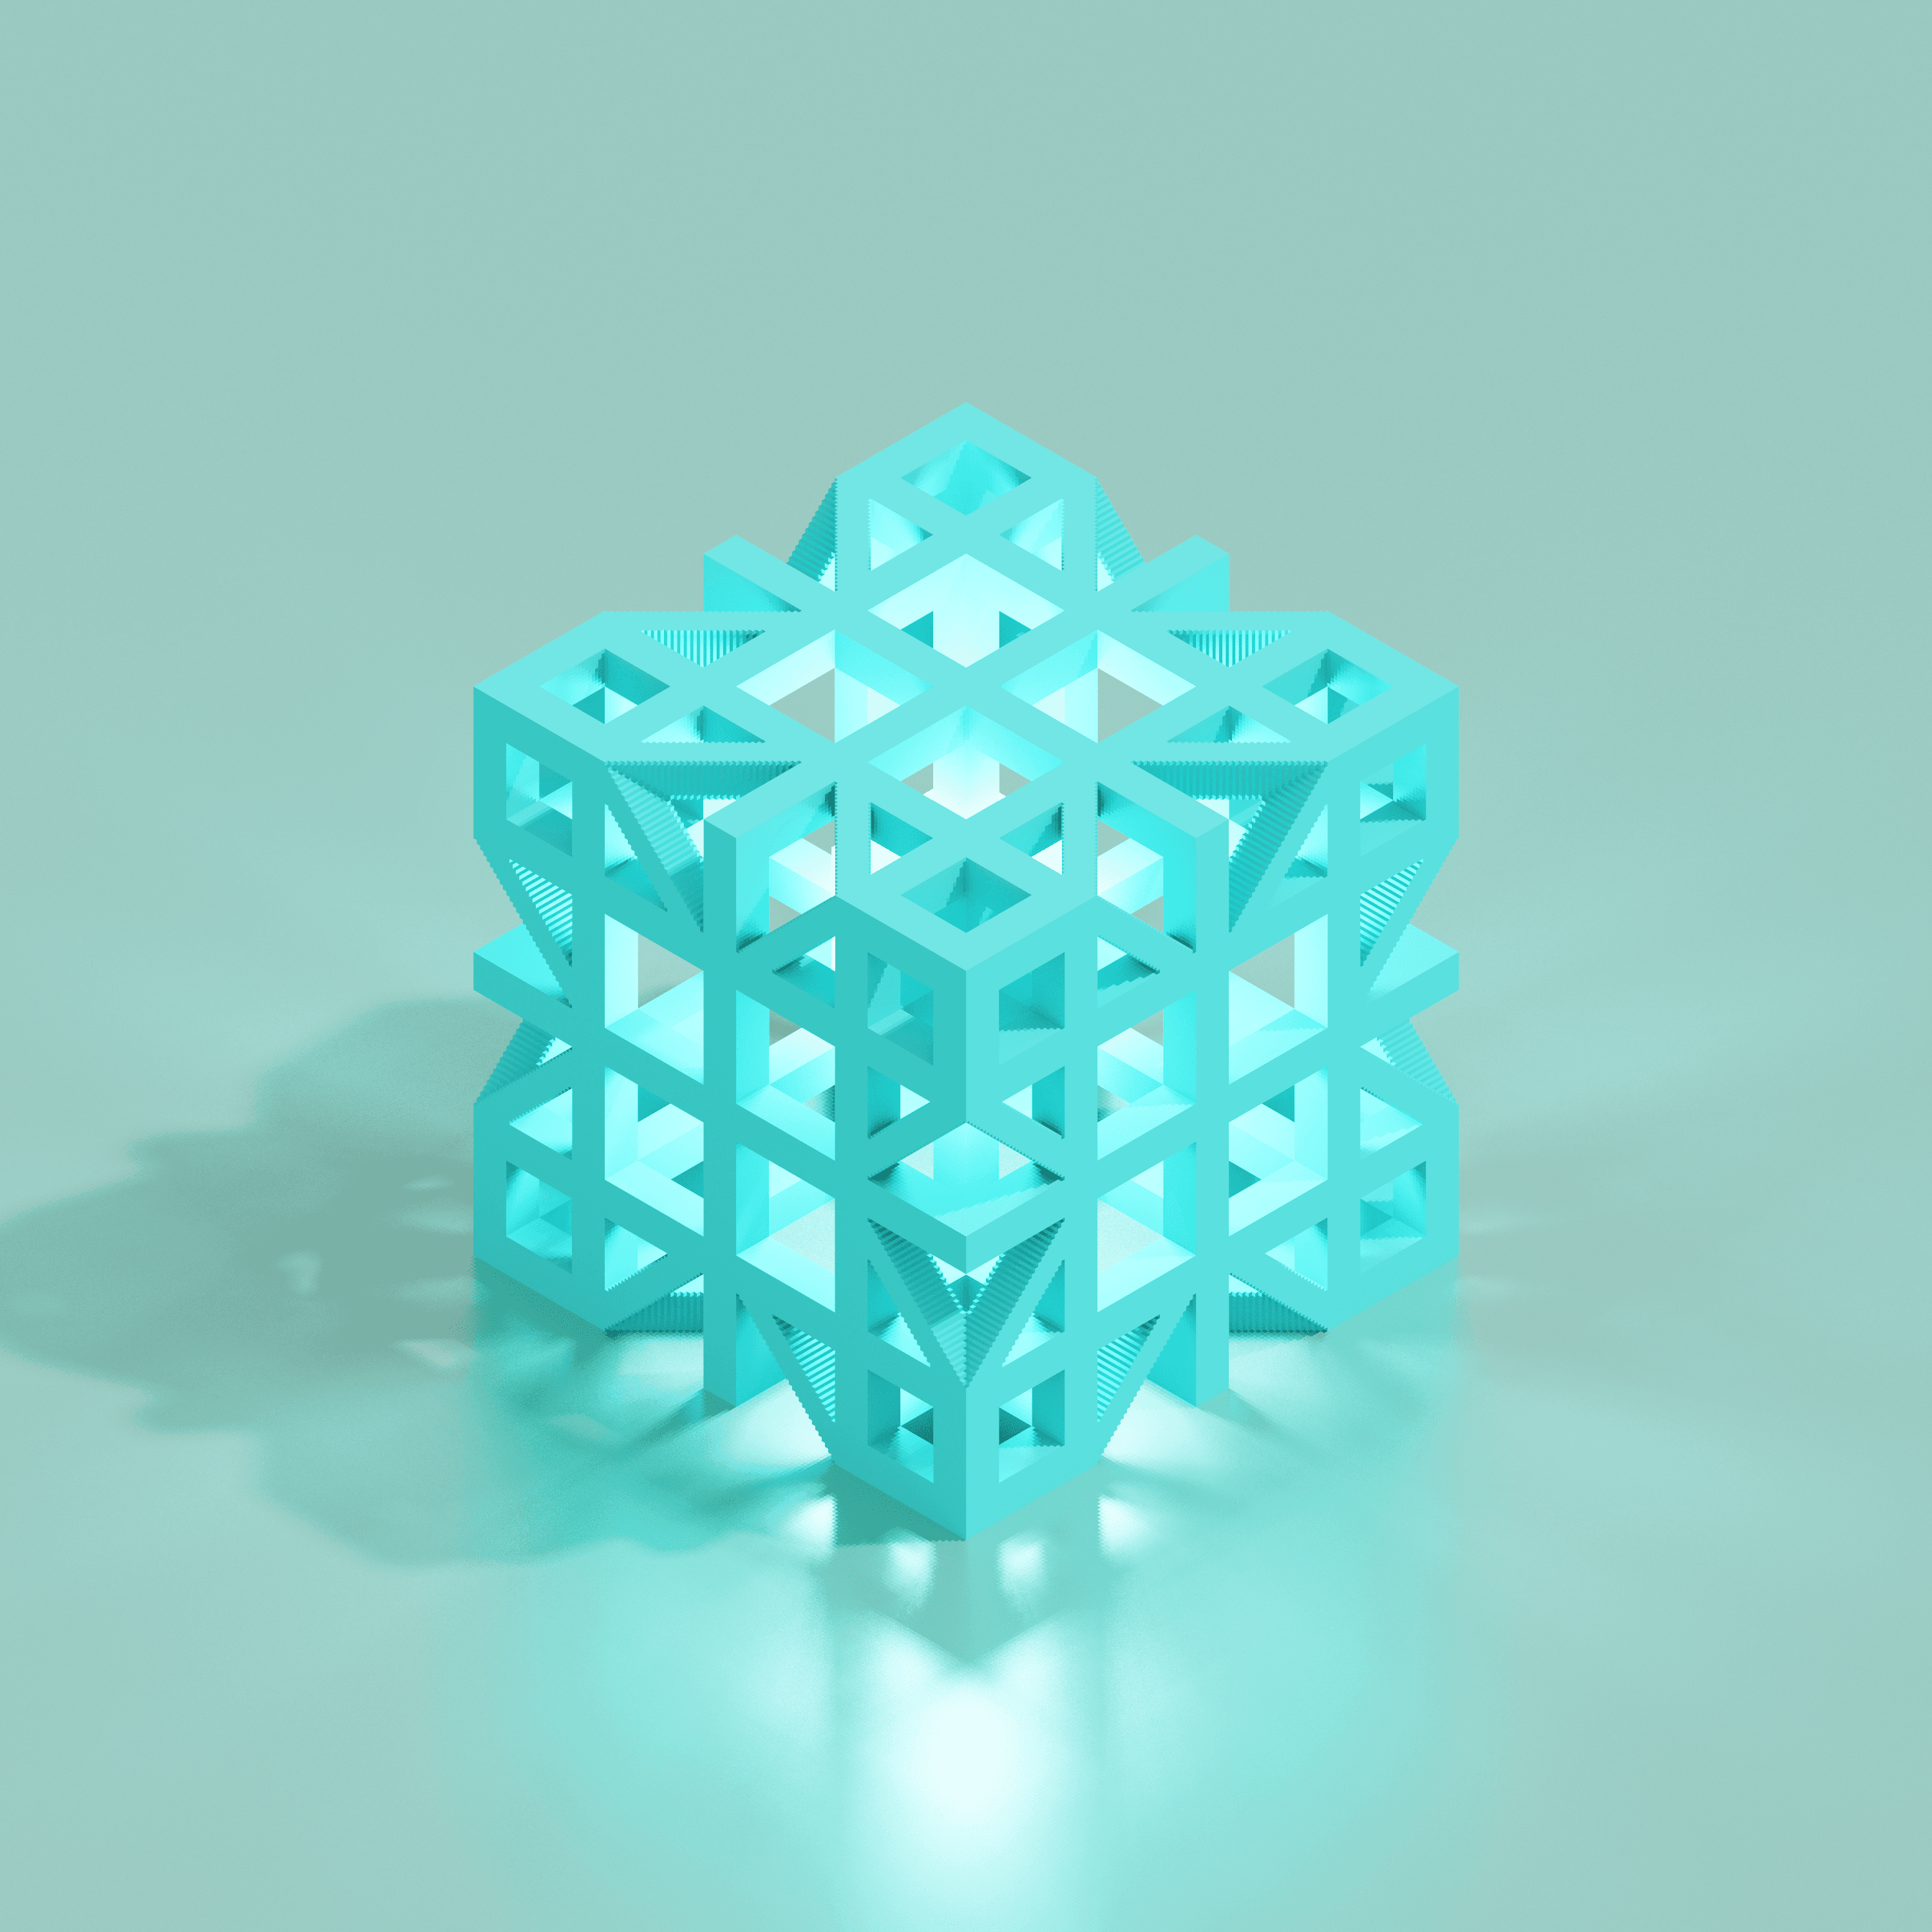 Impossible Voxels #010 - From Within